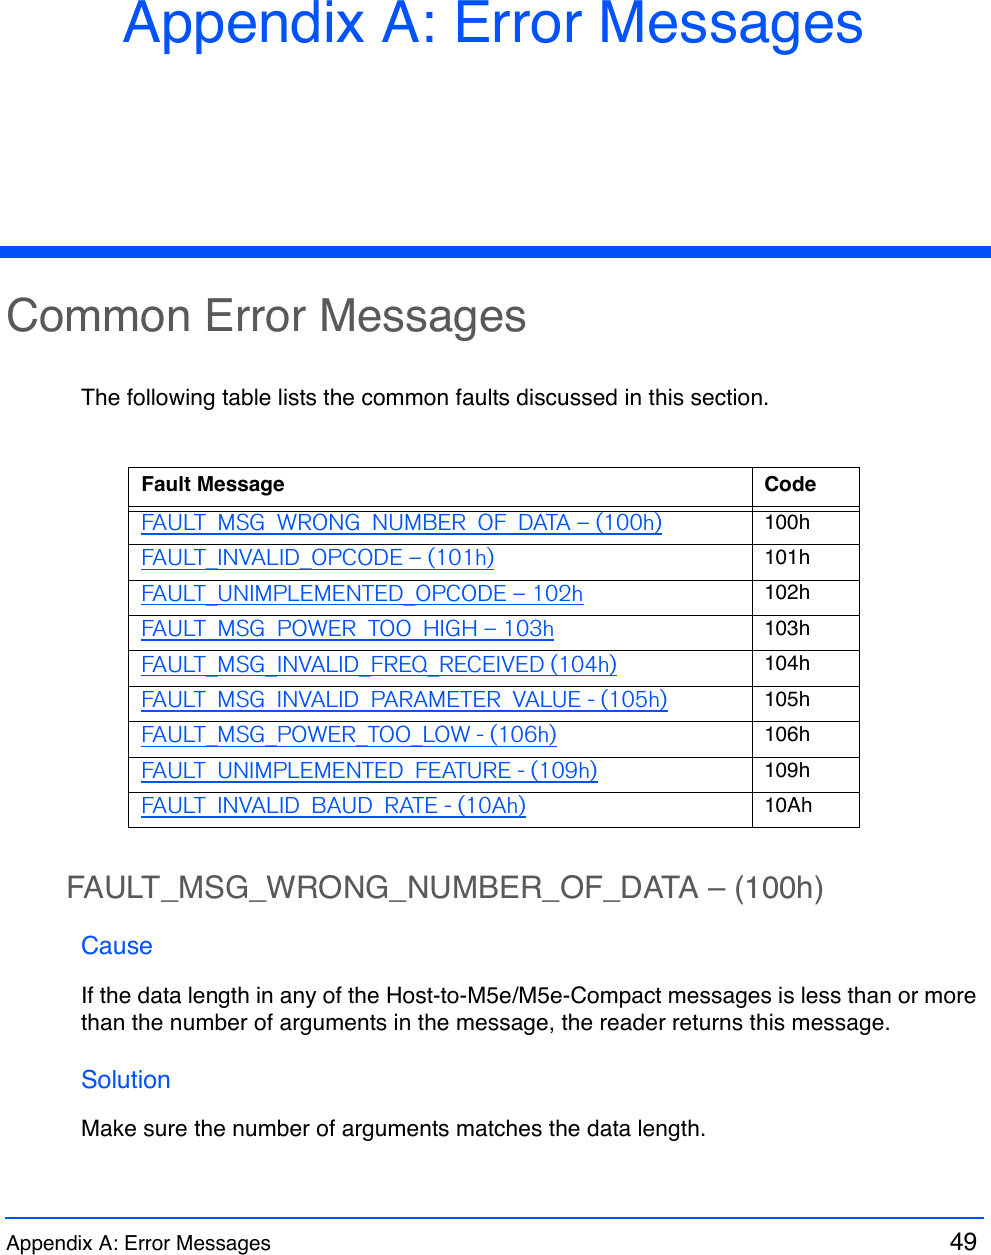 Appendix A: Error Messages  49 Appendix A: Error MessagesCommon Error MessagesThe following table lists the common faults discussed in this section.FAULT_MSG_WRONG_NUMBER_OF_DATA – (100h)CauseIf the data length in any of the Host-to-M5e/M5e-Compact messages is less than or more than the number of arguments in the message, the reader returns this message.SolutionMake sure the number of arguments matches the data length.Fault Message CodeFAULT_MSG_WRONG_NUMBER_OF_DATA – (100h) 100hFAULT_INVALID_OPCODE – (101h) 101hFAULT_UNIMPLEMENTED_OPCODE – 102h 102hFAULT_MSG_POWER_TOO_HIGH – 103h 103hFAULT_MSG_INVALID_FREQ_RECEIVED (104h) 104hFAULT_MSG_INVALID_PARAMETER_VALUE - (105h) 105hFAULT_MSG_POWER_TOO_LOW - (106h) 106hFAULT_UNIMPLEMENTED_FEATURE - (109h) 109hFAULT_INVALID_BAUD_RATE - (10Ah) 10Ah